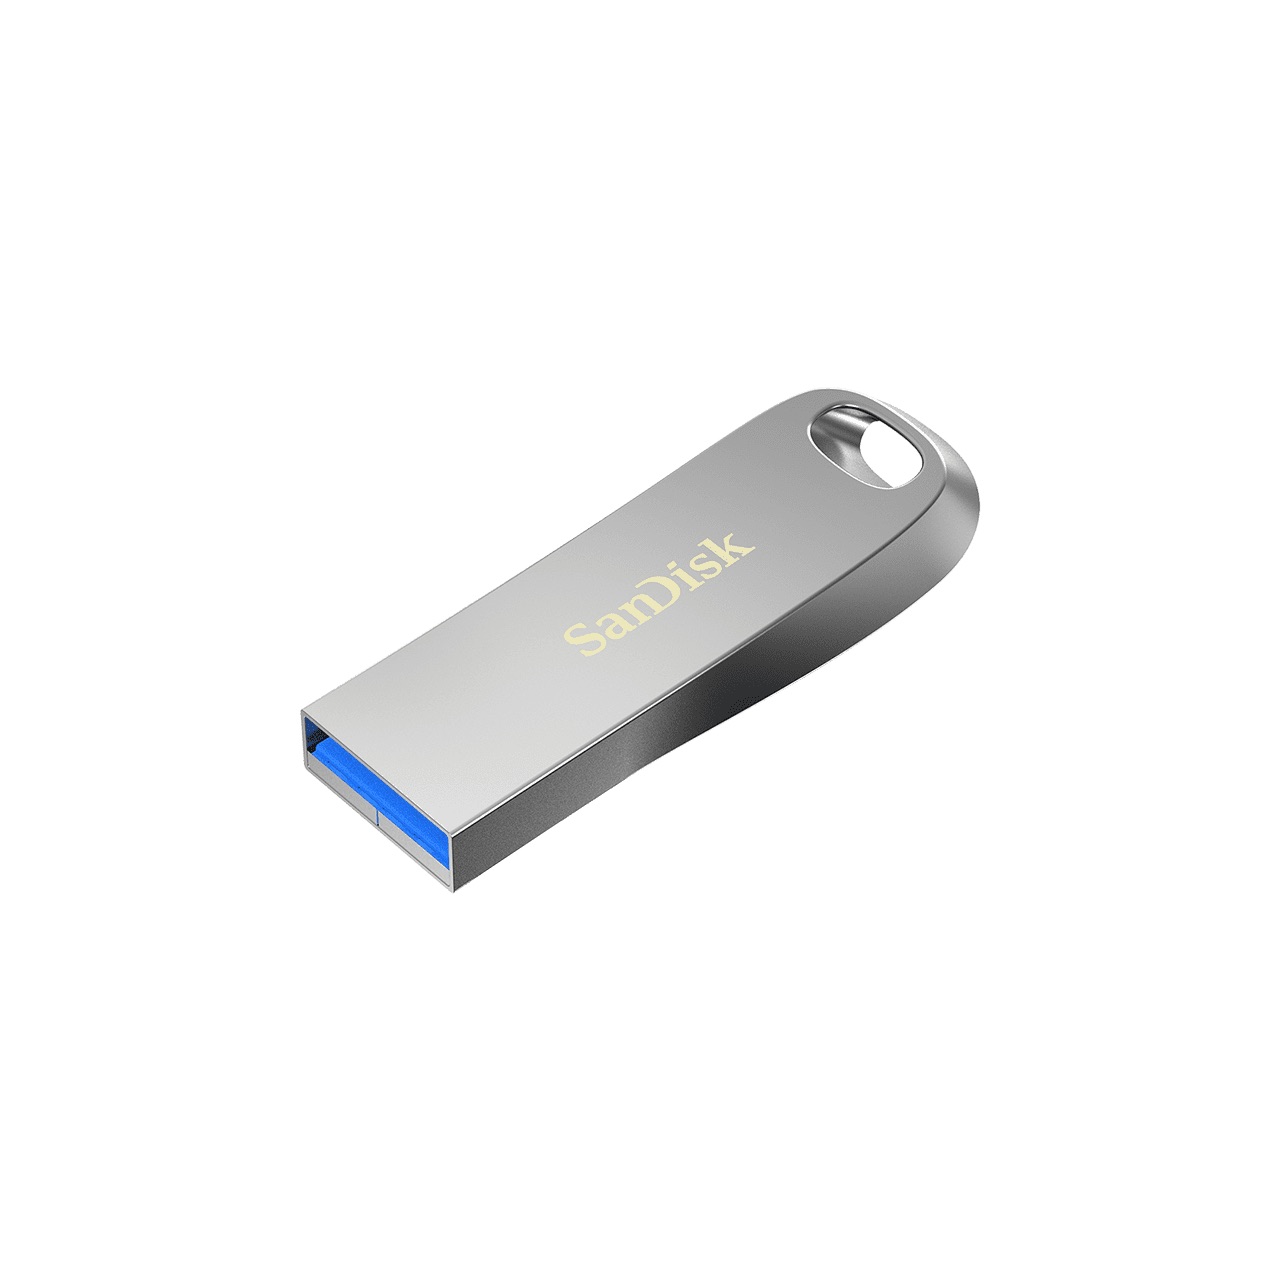 SanDisk SDCZ74-128G-A46 Ultra 128GB USB 3.1 Type A Metal  from Am-Dig